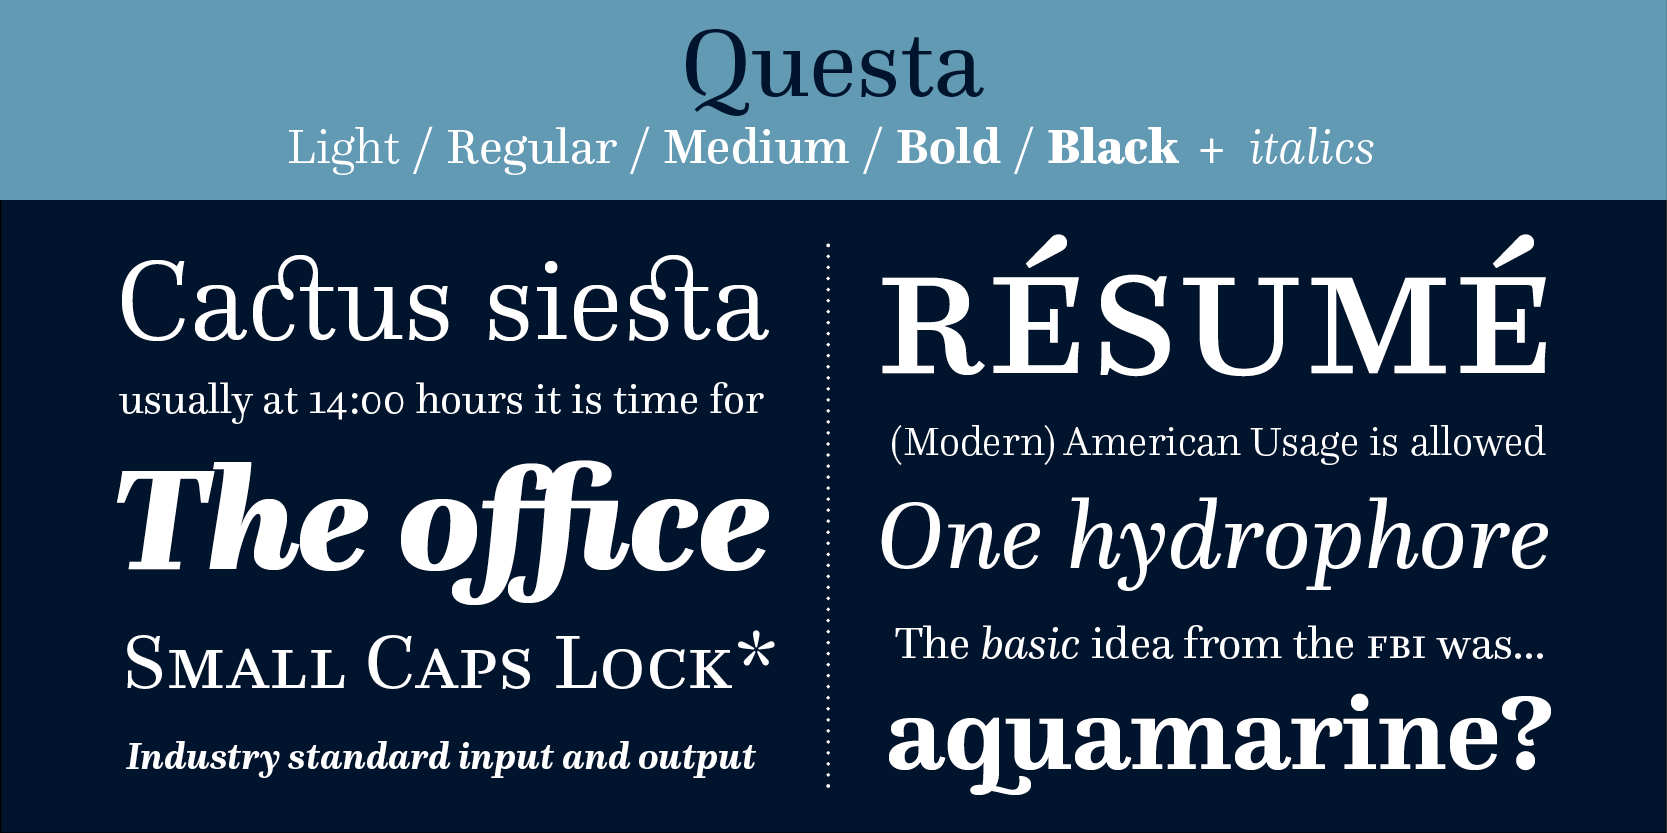 Card displaying Questa typeface in various styles